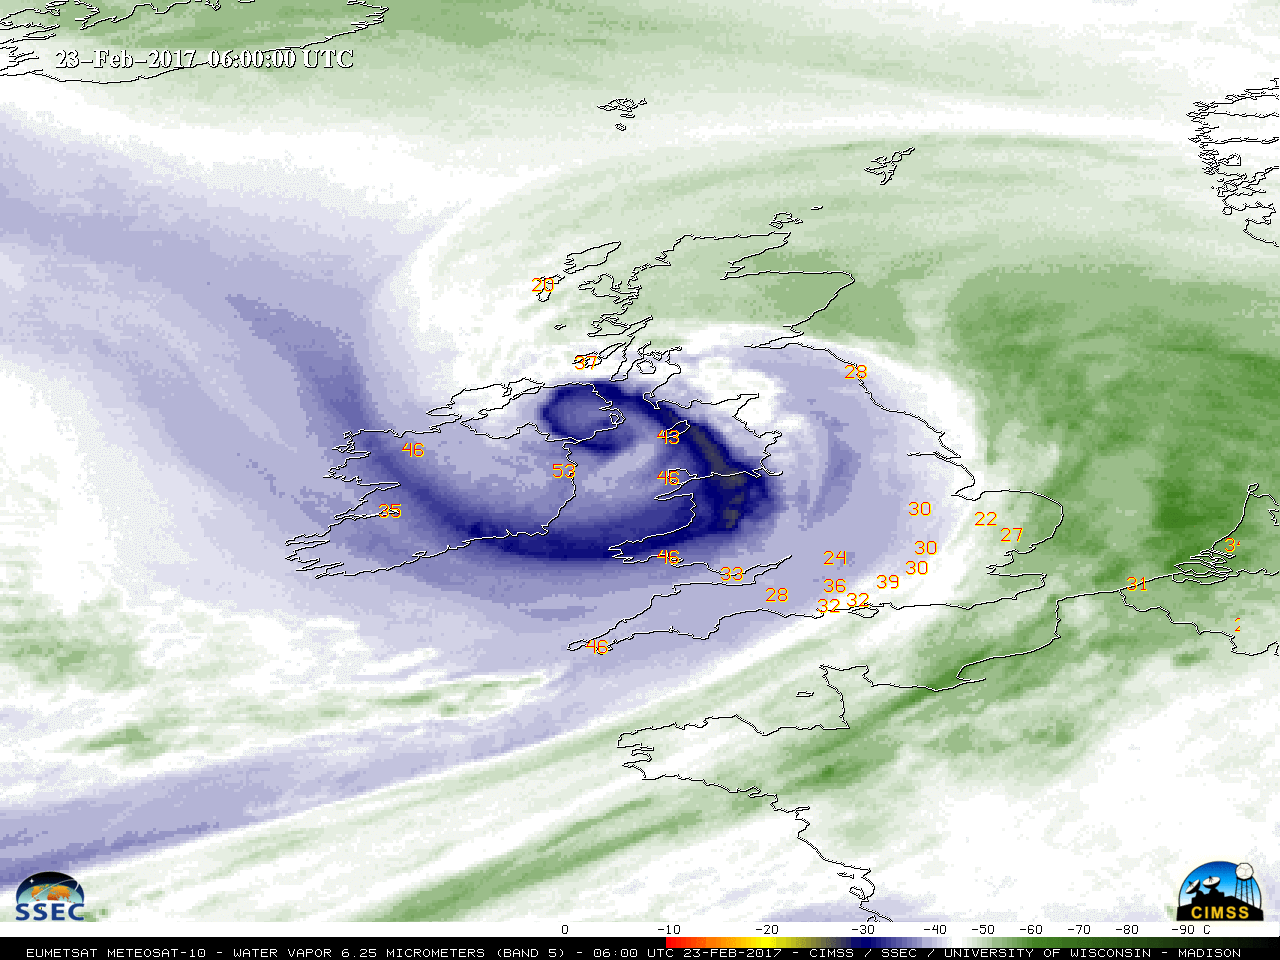 Meteosat-10 Water Vapor (6.25 µm) images, with hourly surface wind gusts in knots [click to play animation]